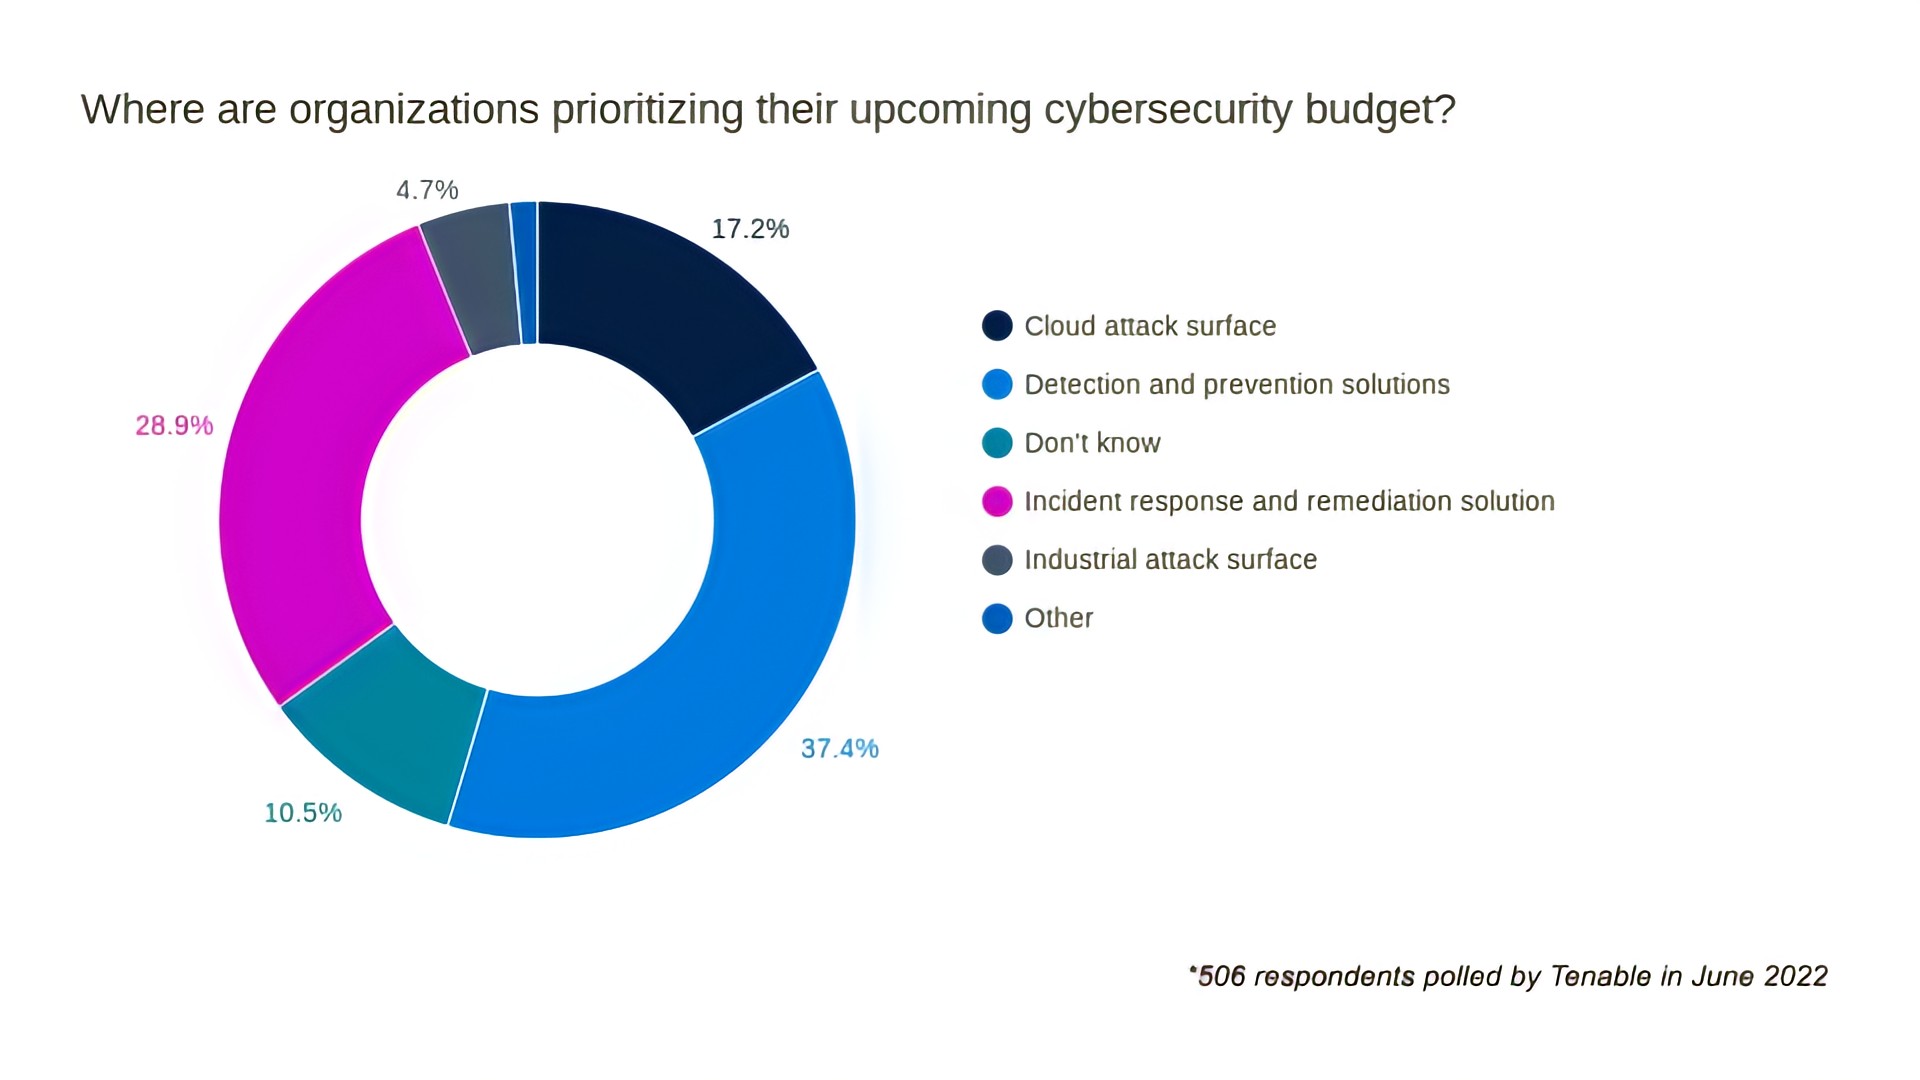 CISO cybersecurity budgeting priorities and best practices